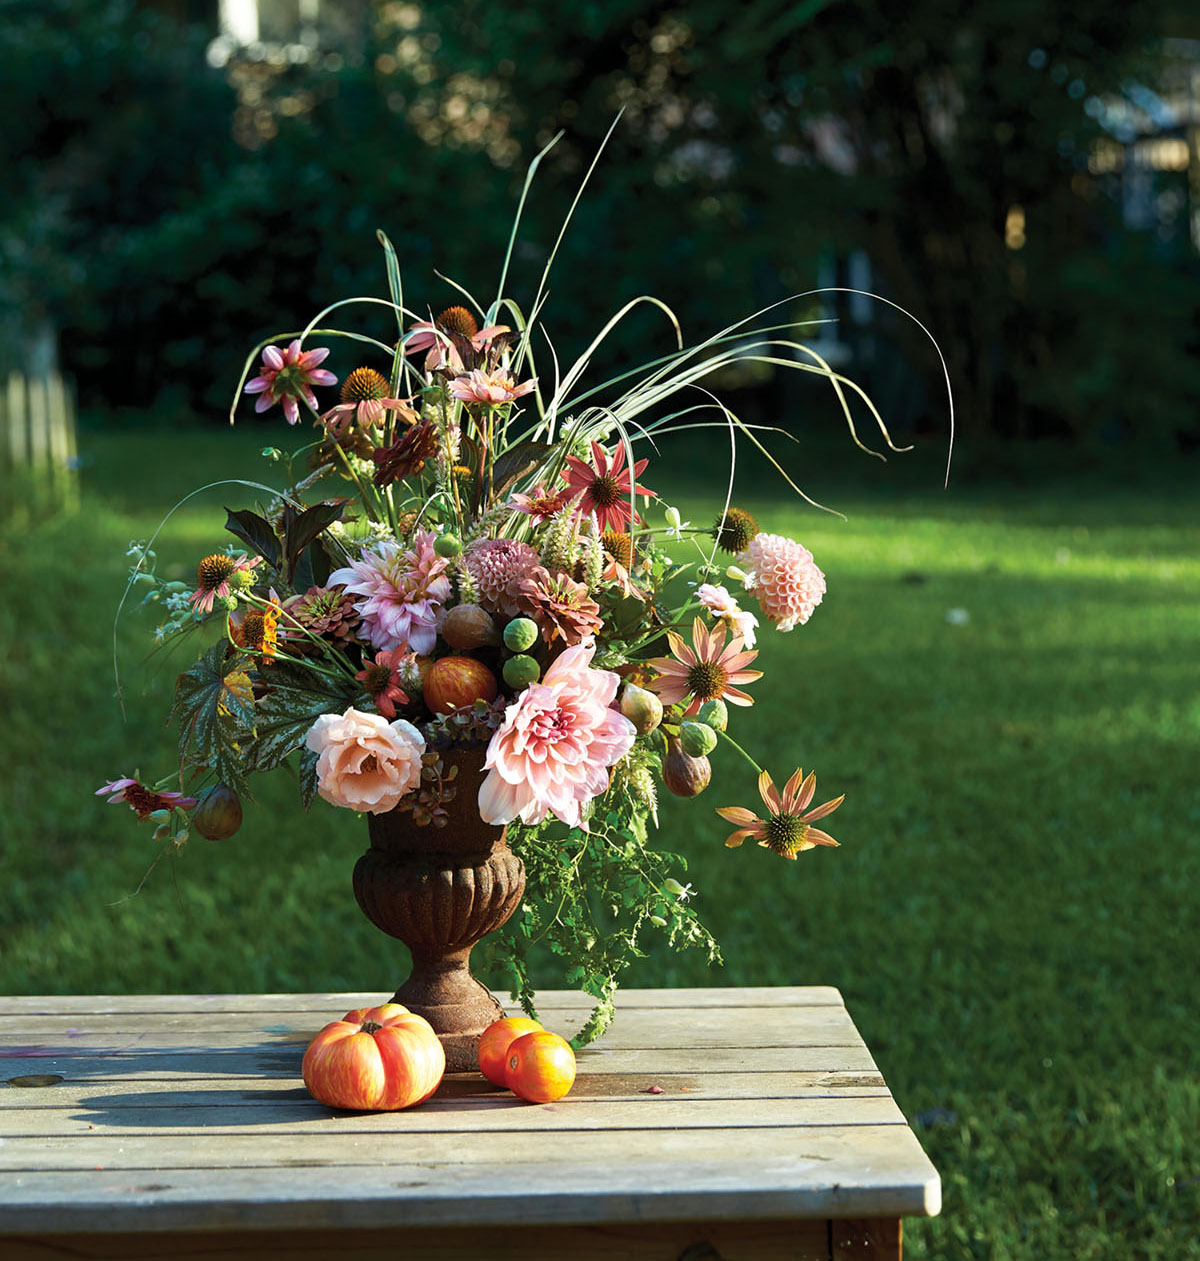 peach, pink, green, and rust-colored summer arrangement by Birmingham, AL floral designer Kappi Naftel of Kap Flowers. The vessel is a rust-colored urn, which sits on a picnic table alongside summer tomatoes, with an expanse of green lawn in the background